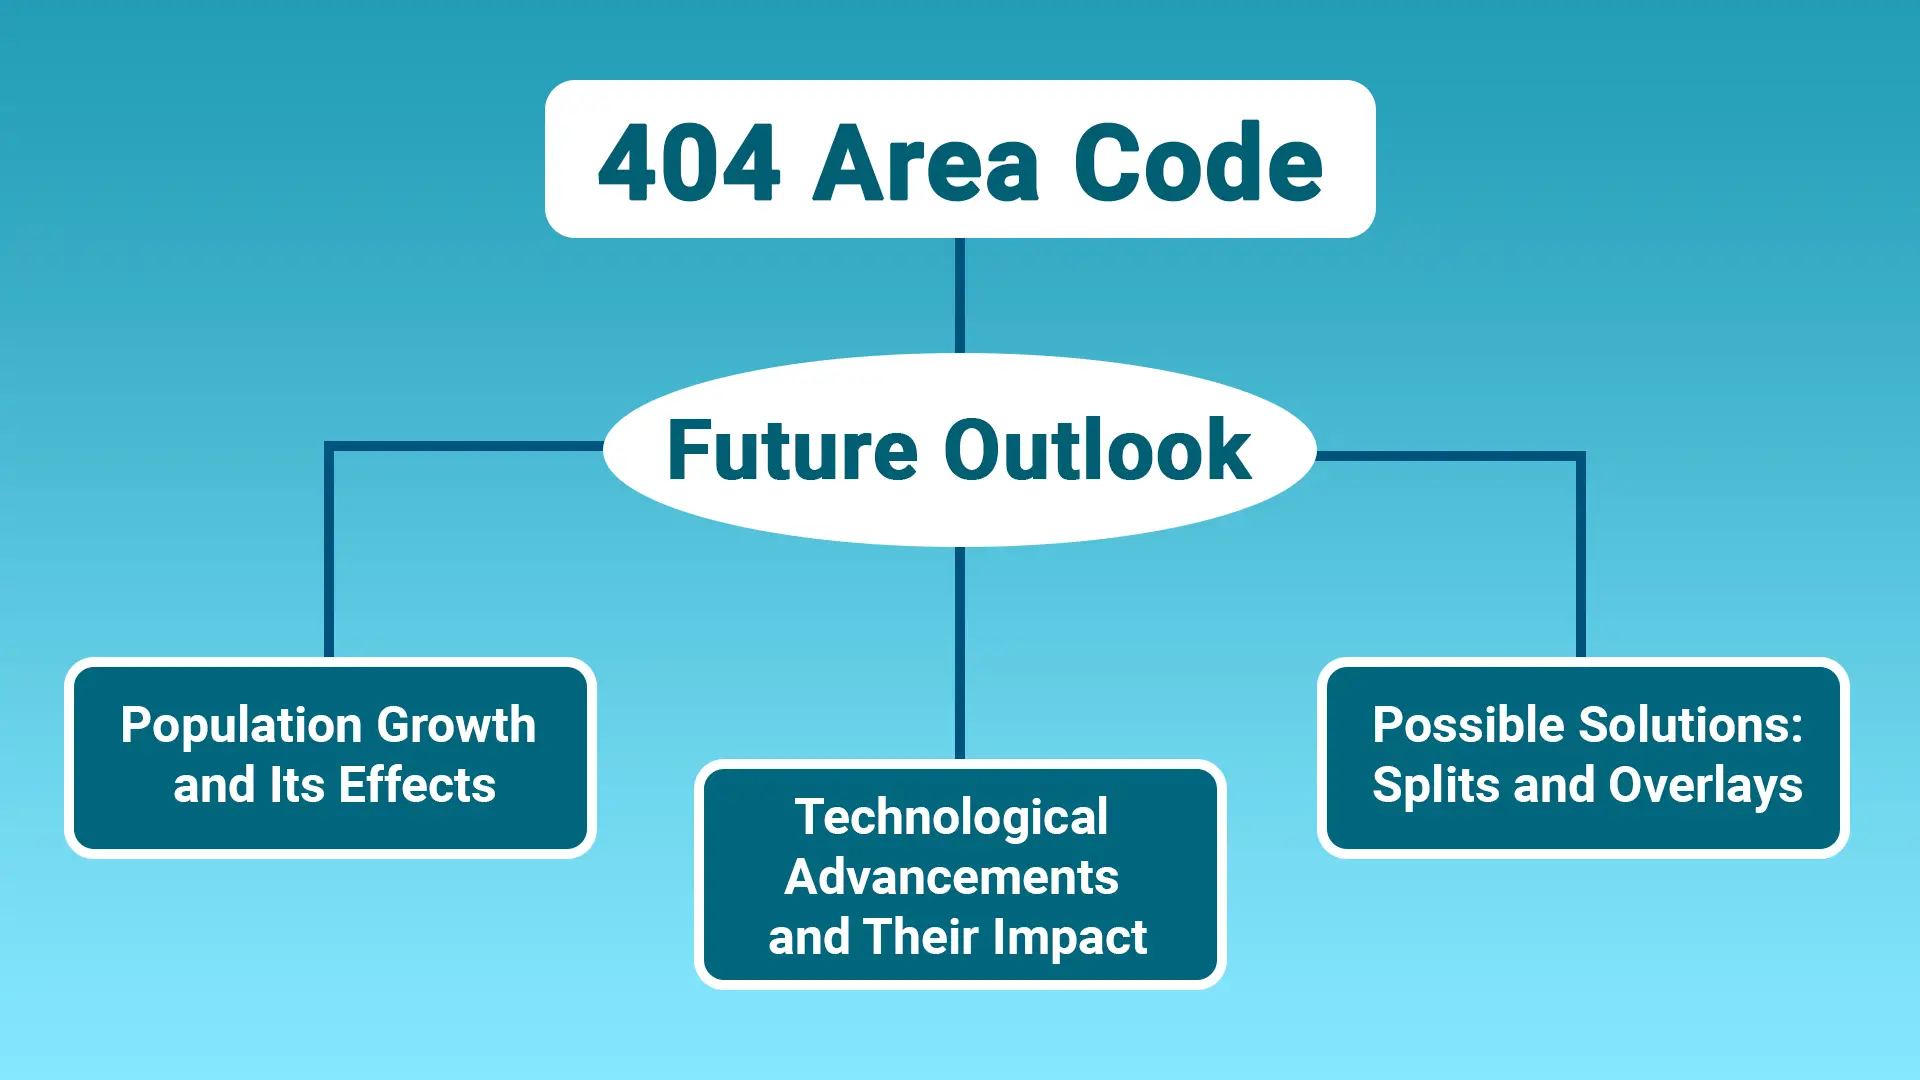 Future Outlook for the 404 Area Code